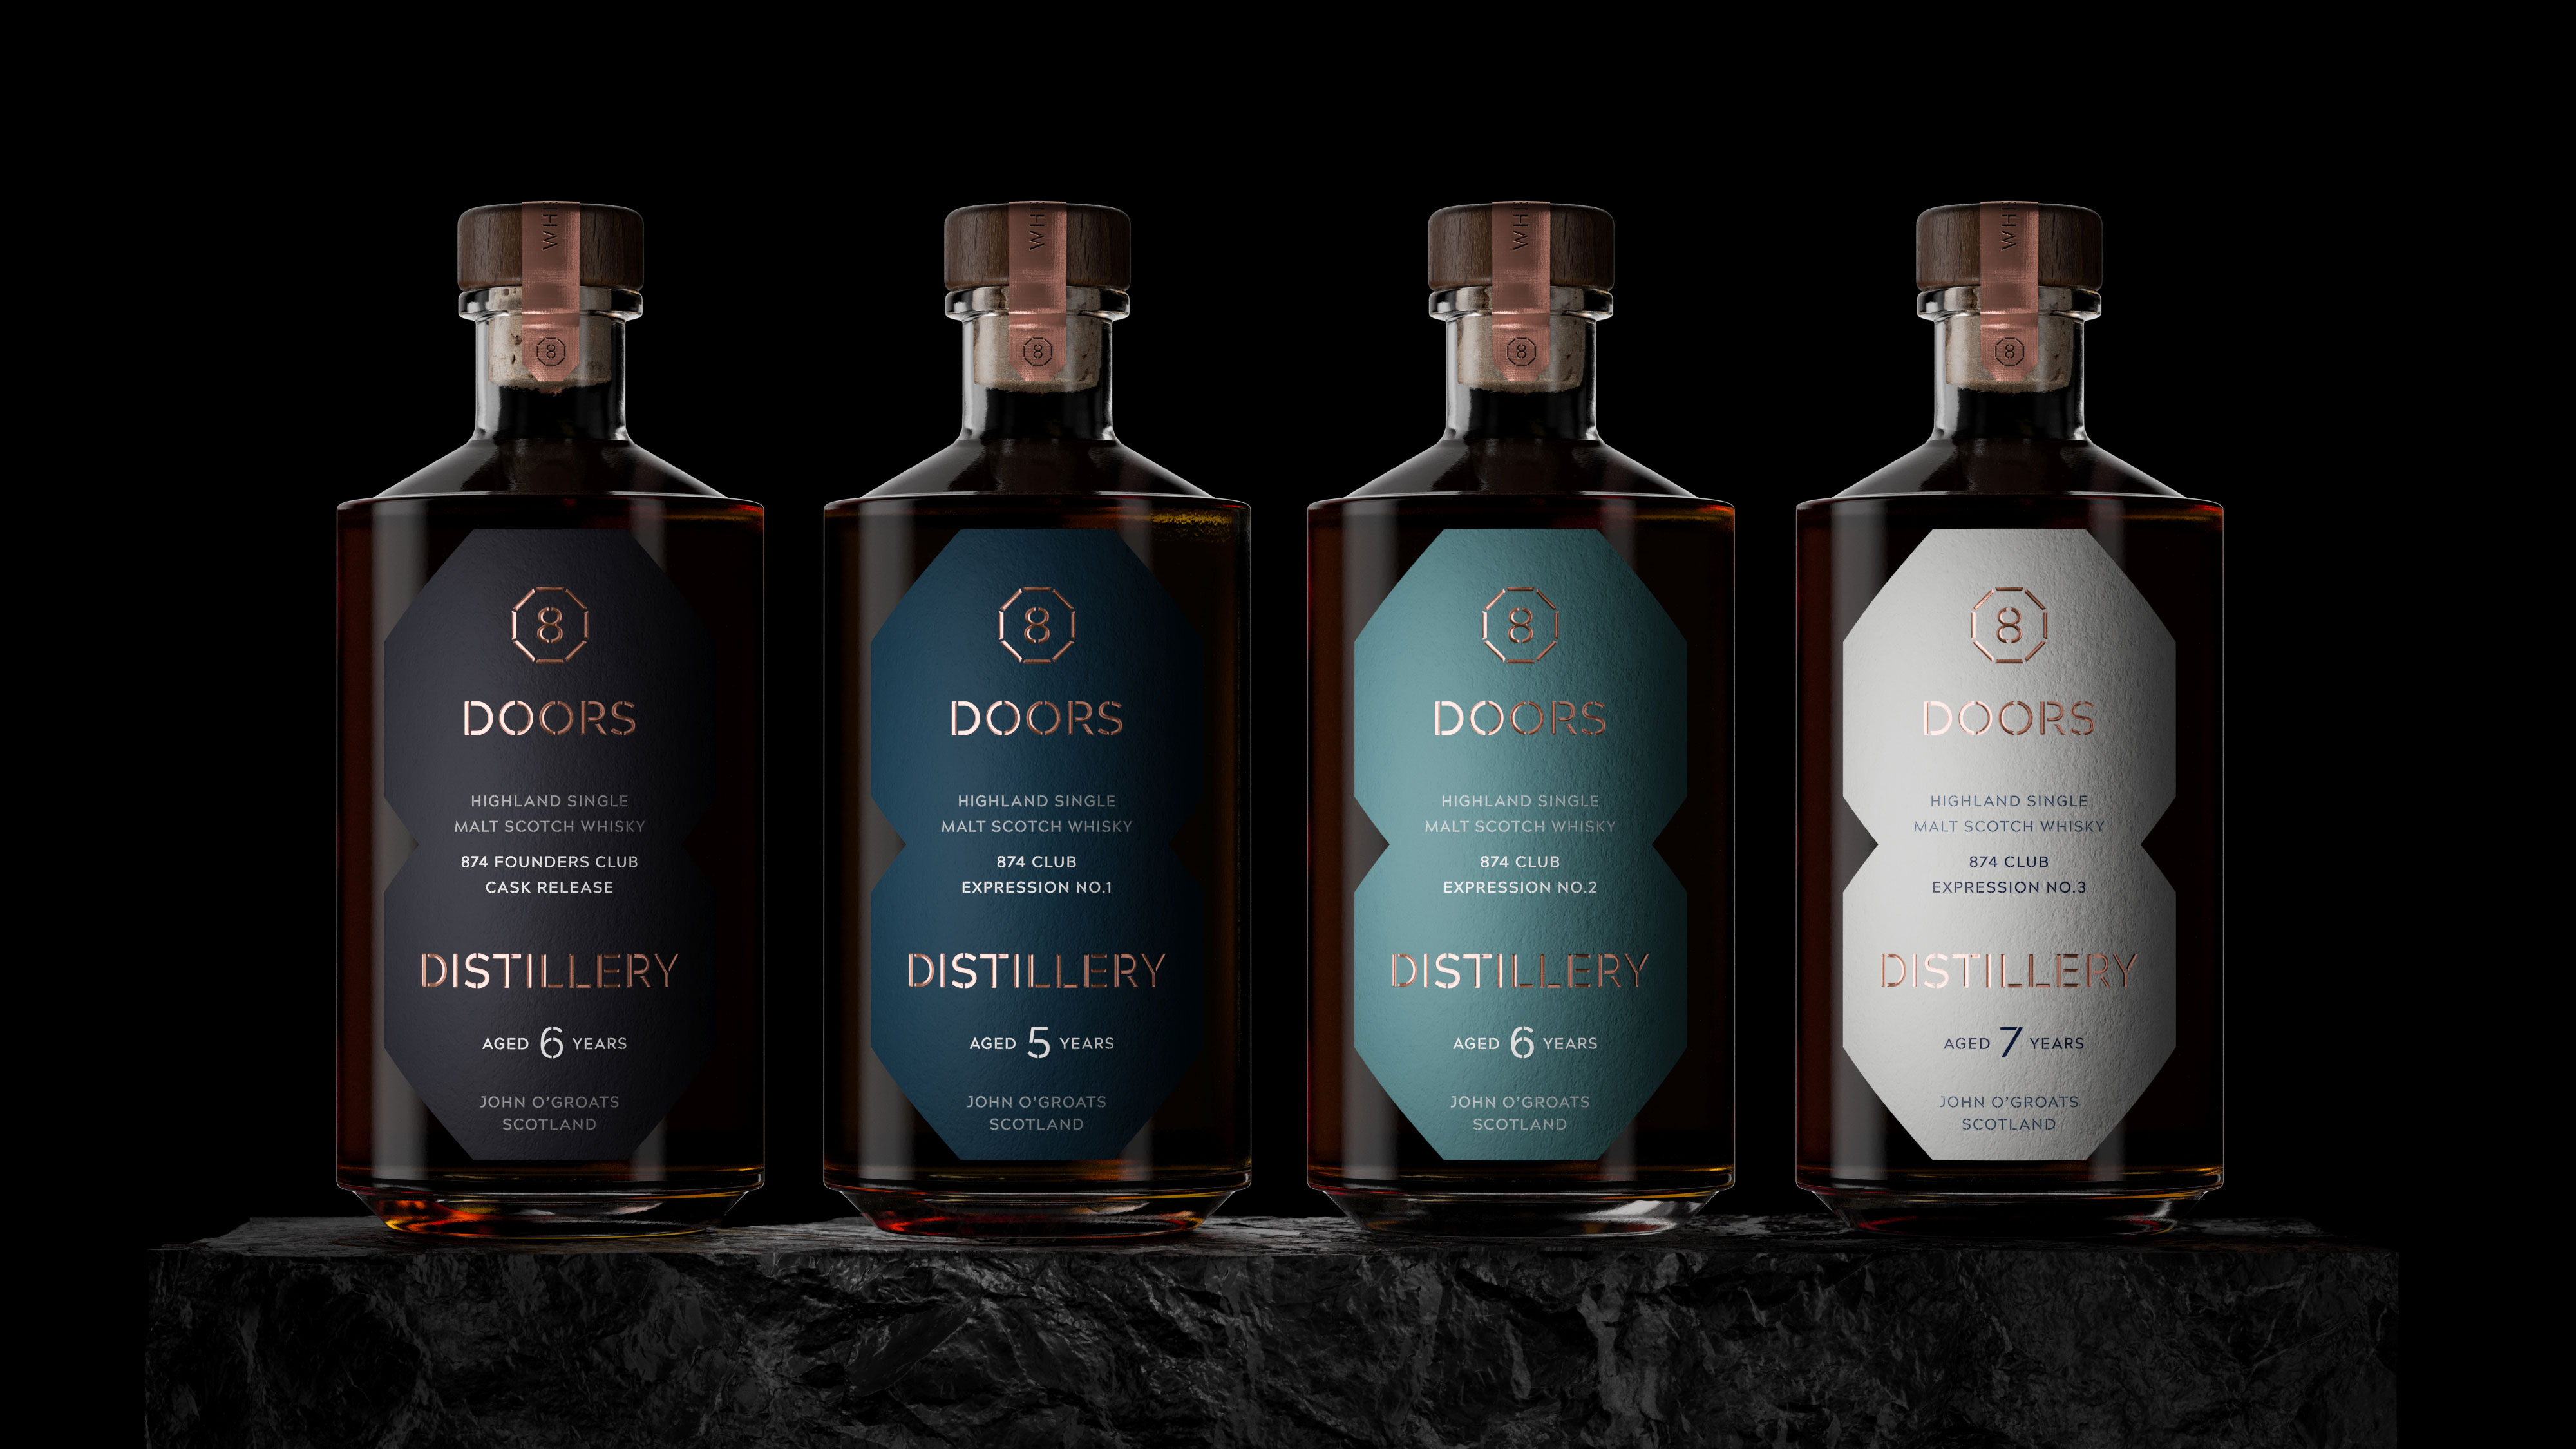 Freytag Anderson Creates Identity and Packaging Design for 8 Doors Distillery Micro-Distillery Whisky